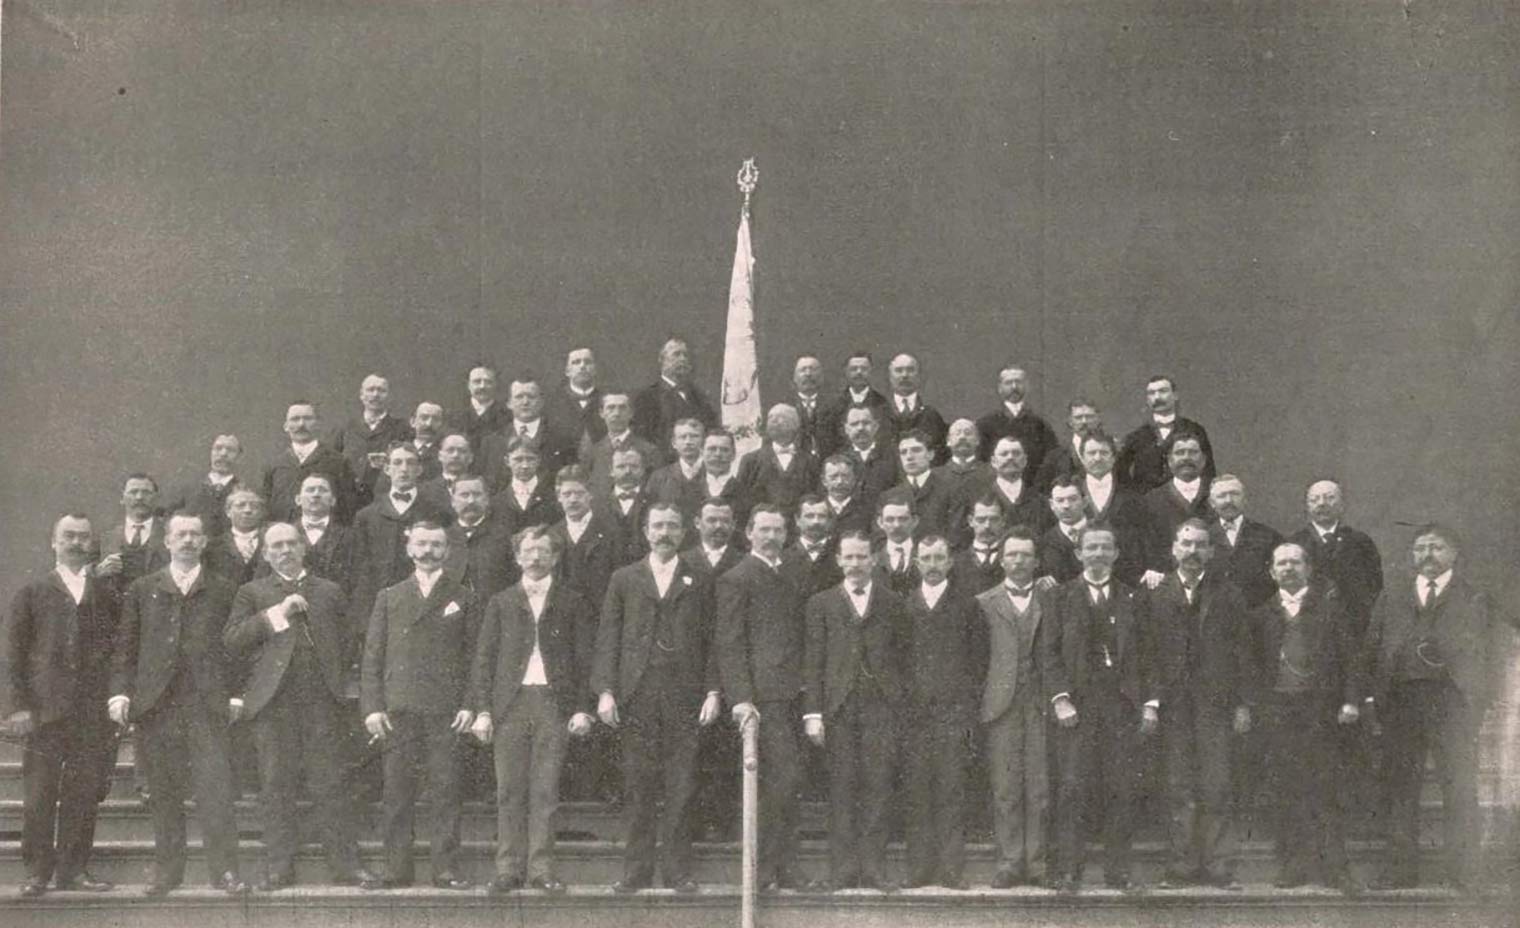 Archival image of a group of men, the Thalia Maennerchor, in 1903